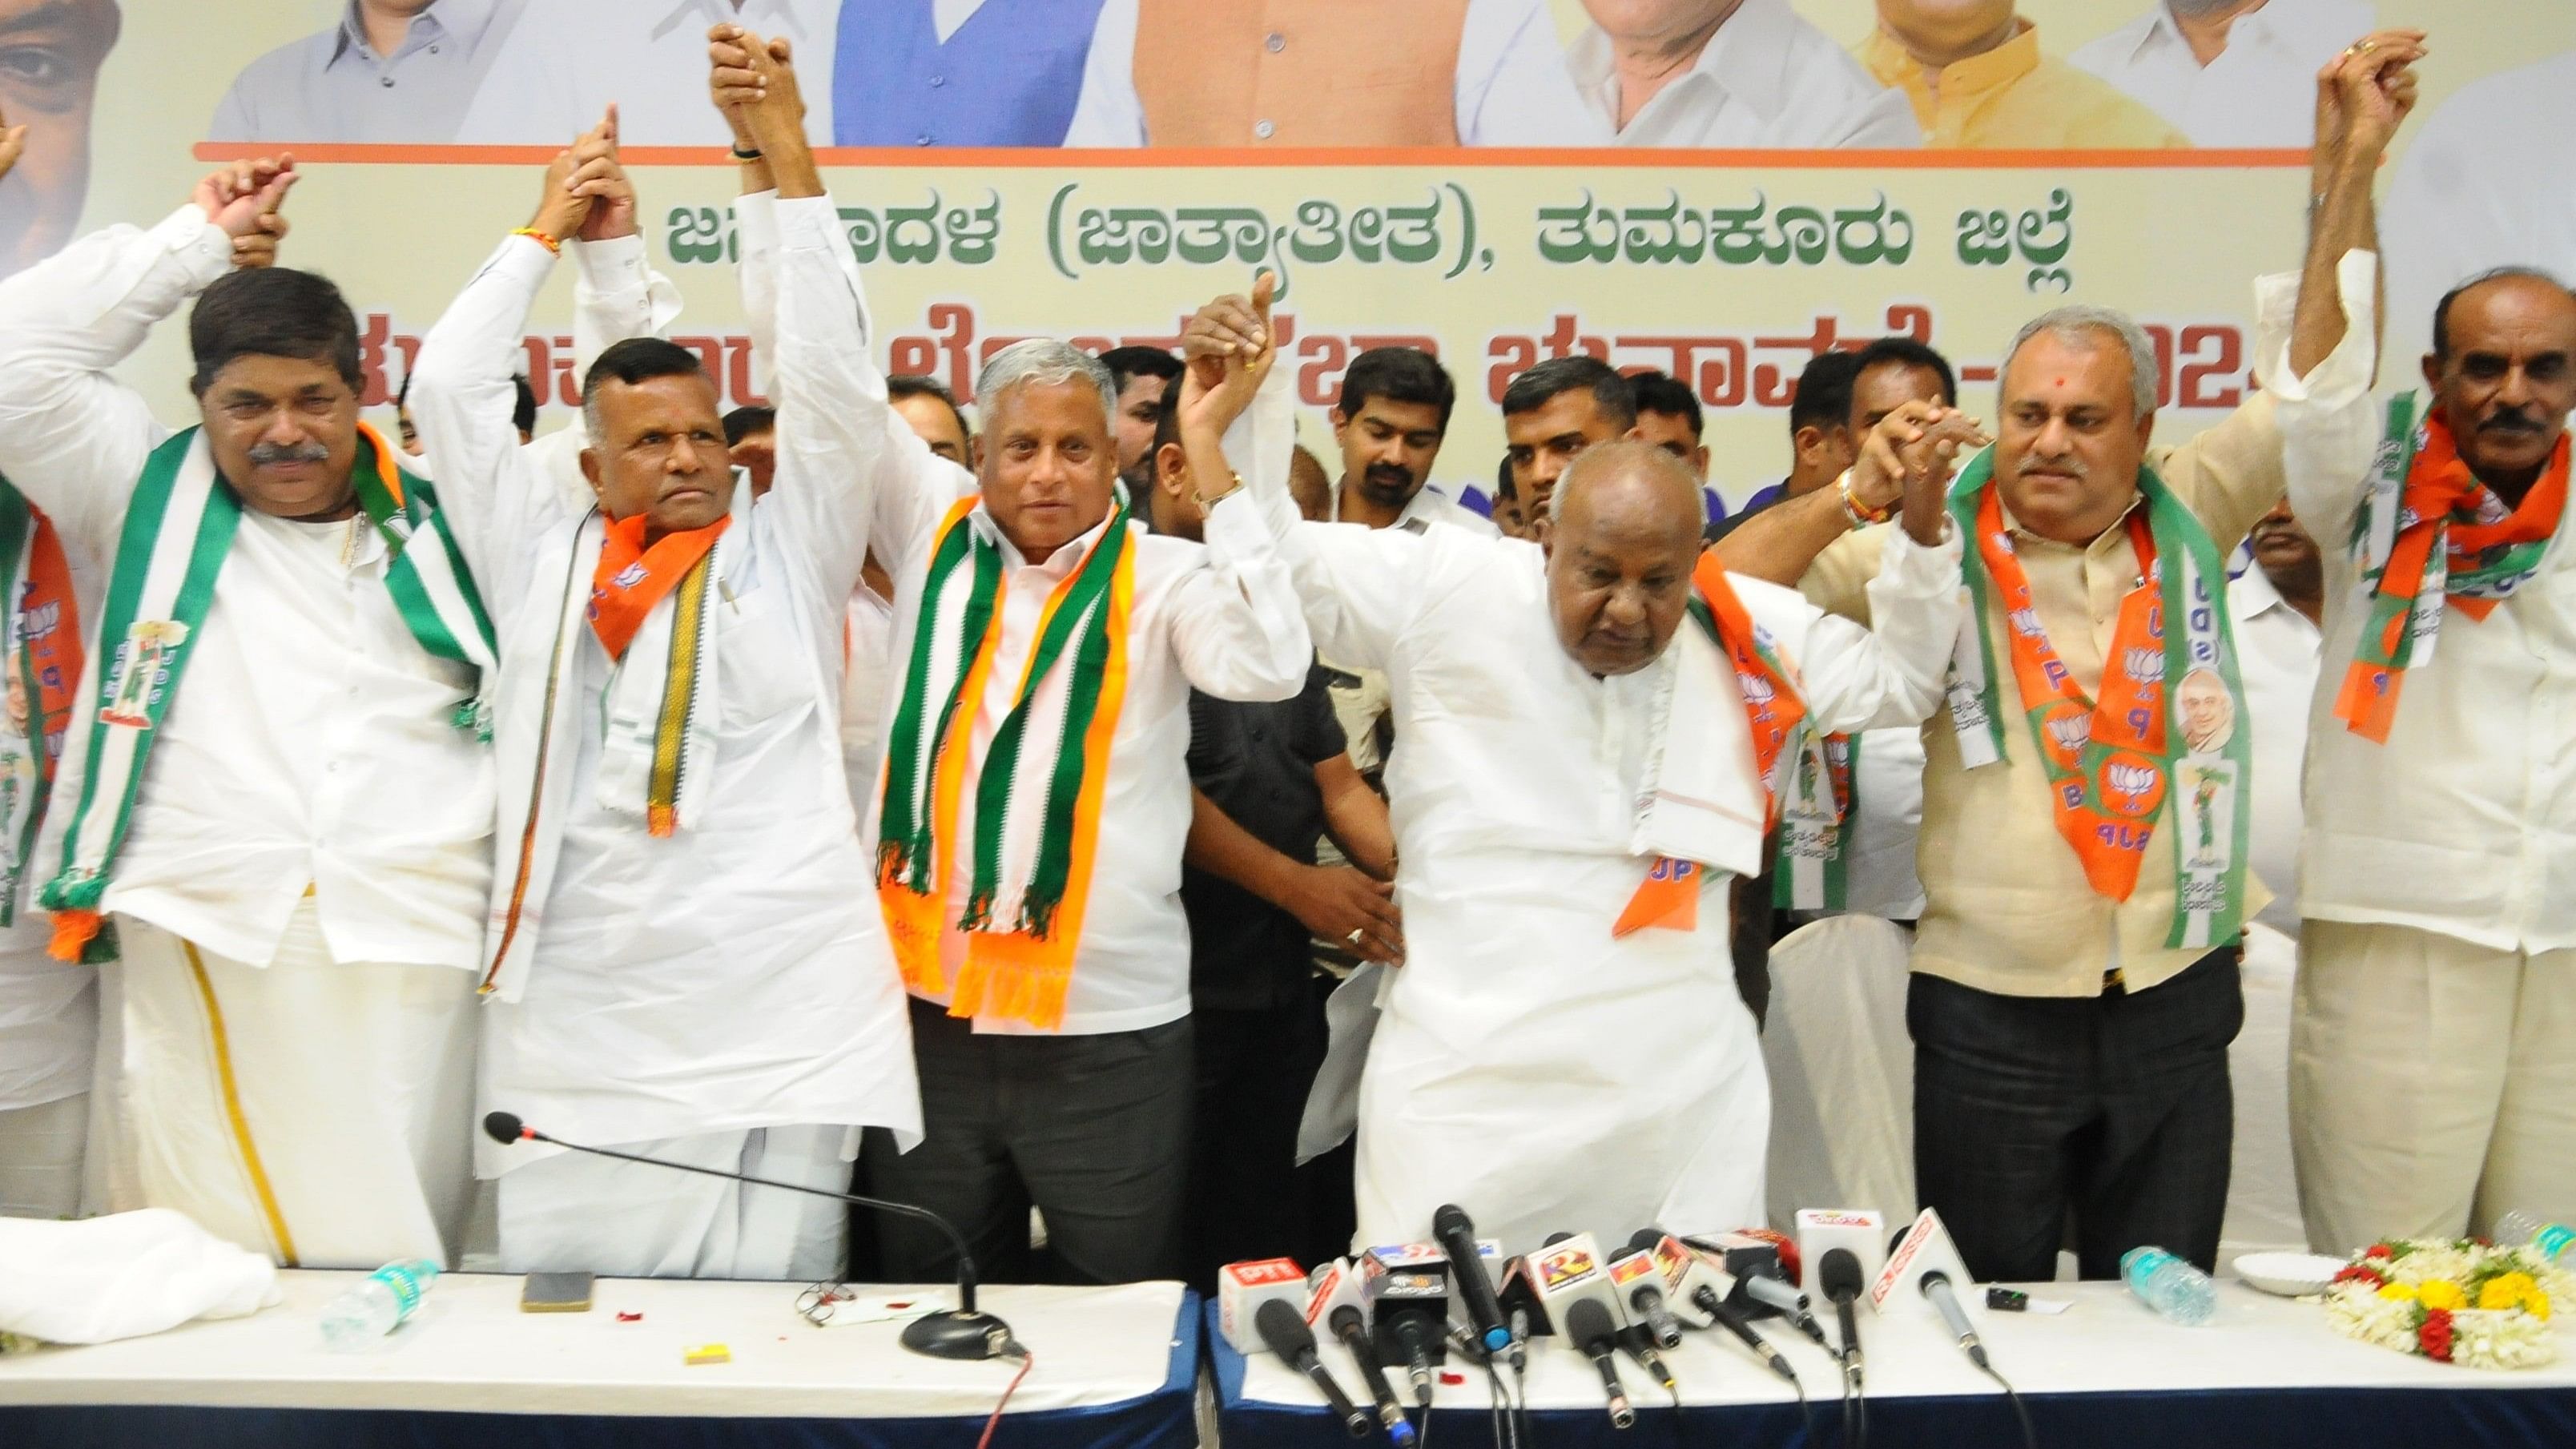 <div class="paragraphs"><p>Former prime minister and JD(S) supremo H D Deve Gowda, BJP Tumkur Lok Sabha constituency candidate V Somanna, former minister K Gopalaiah and others at a public meeting in Tumakuru on Saturday.</p></div>